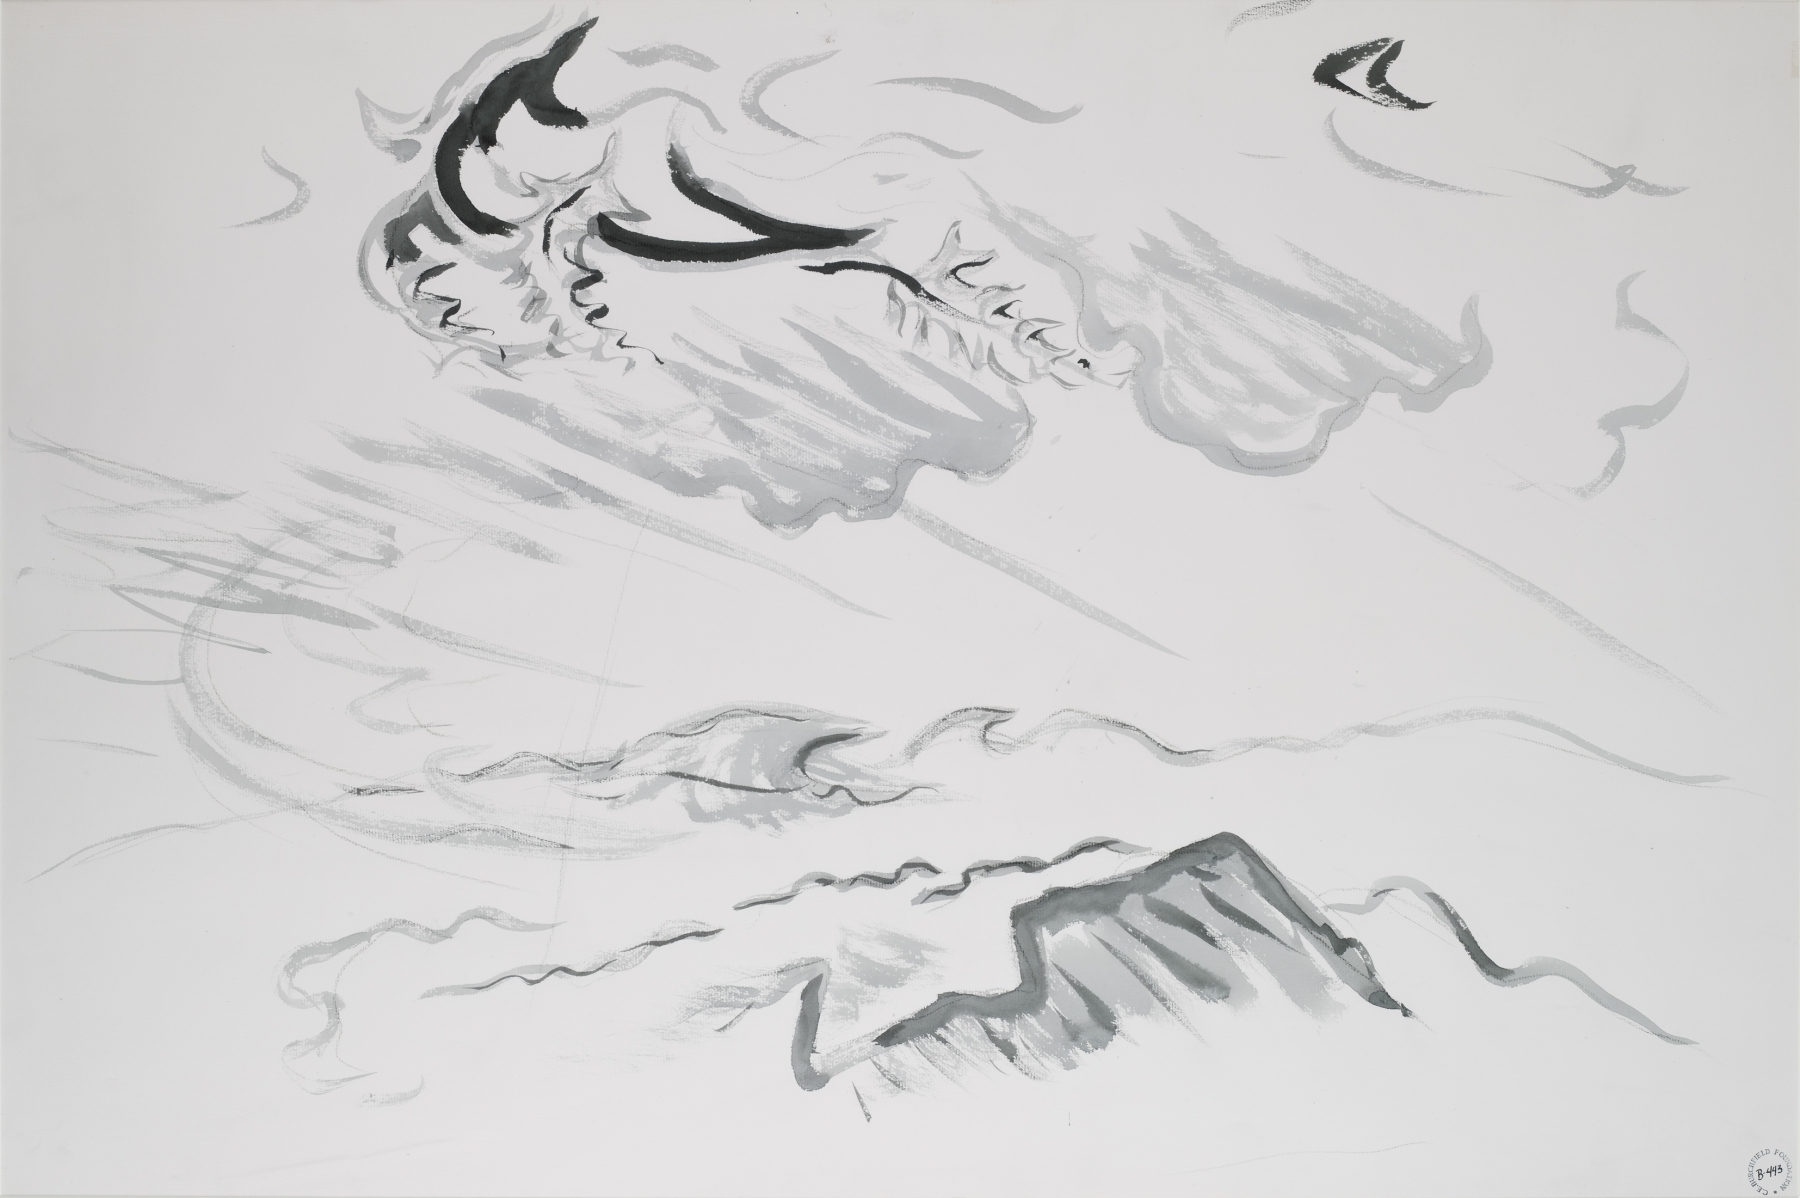 Wind, c. 1960

Ink and charcoal on paper

26 x 40 inches